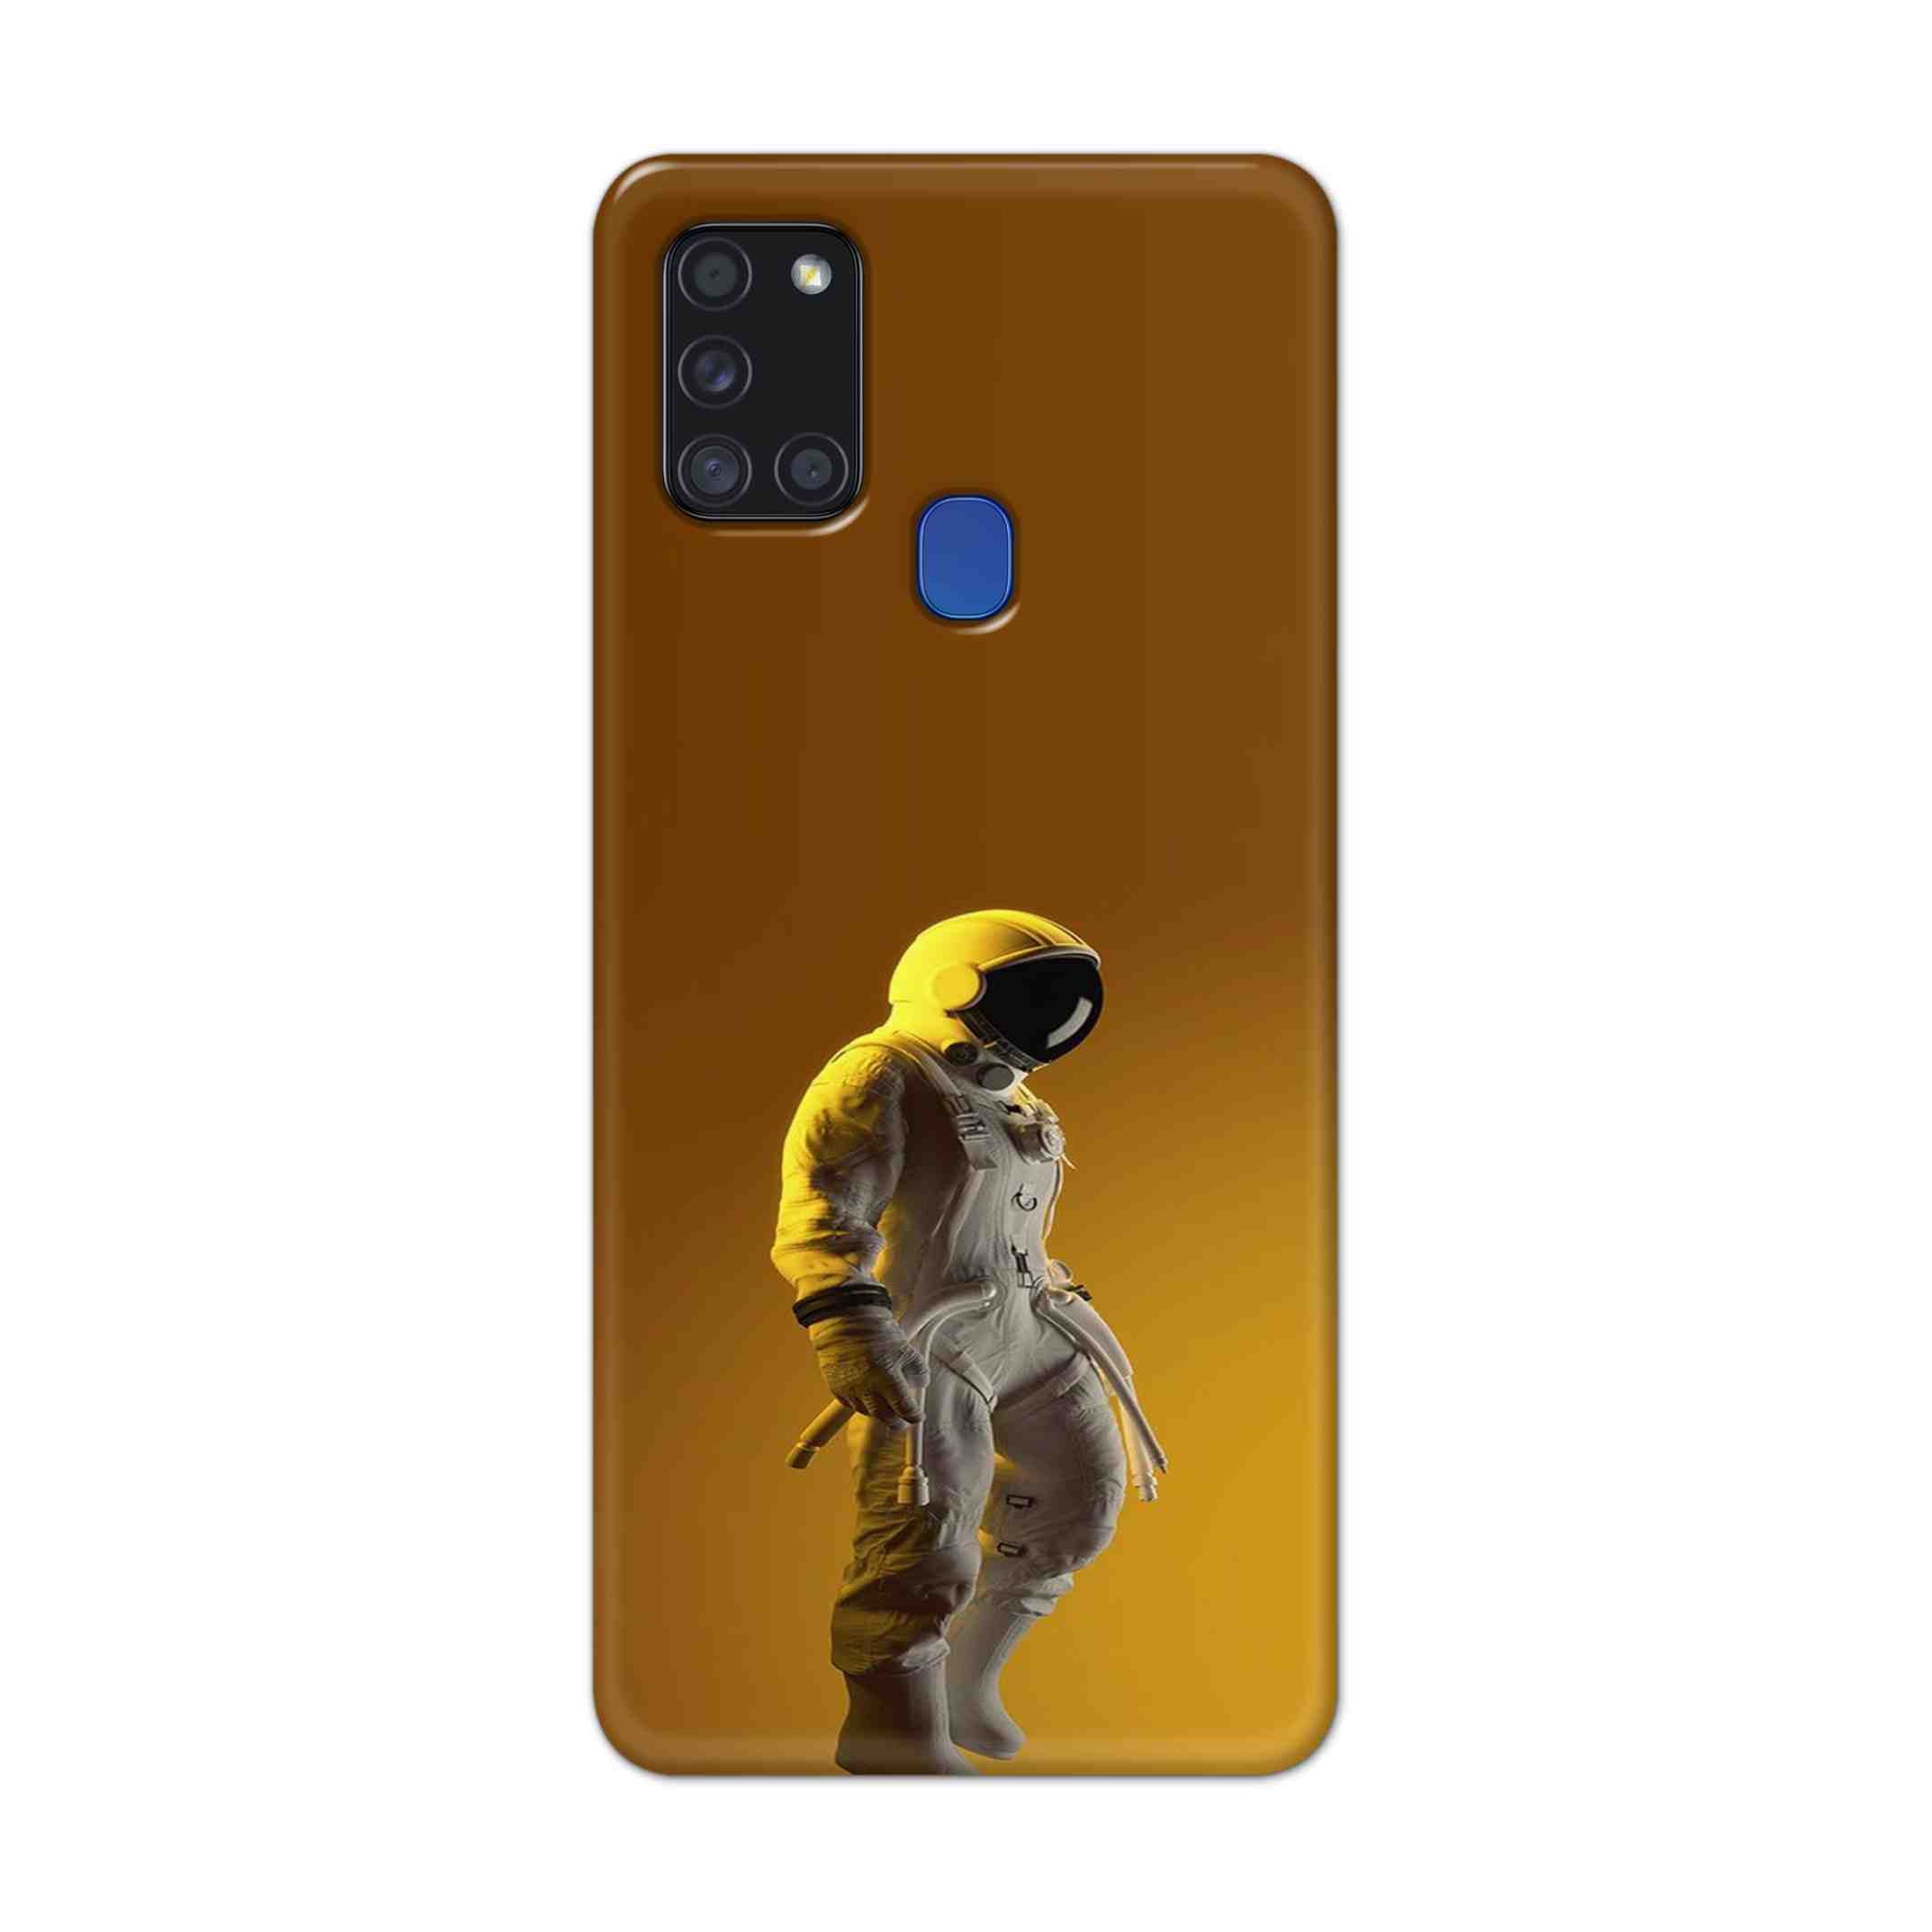 Buy Yellow Astronaut Hard Back Mobile Phone Case Cover For Samsung Galaxy A21s Online